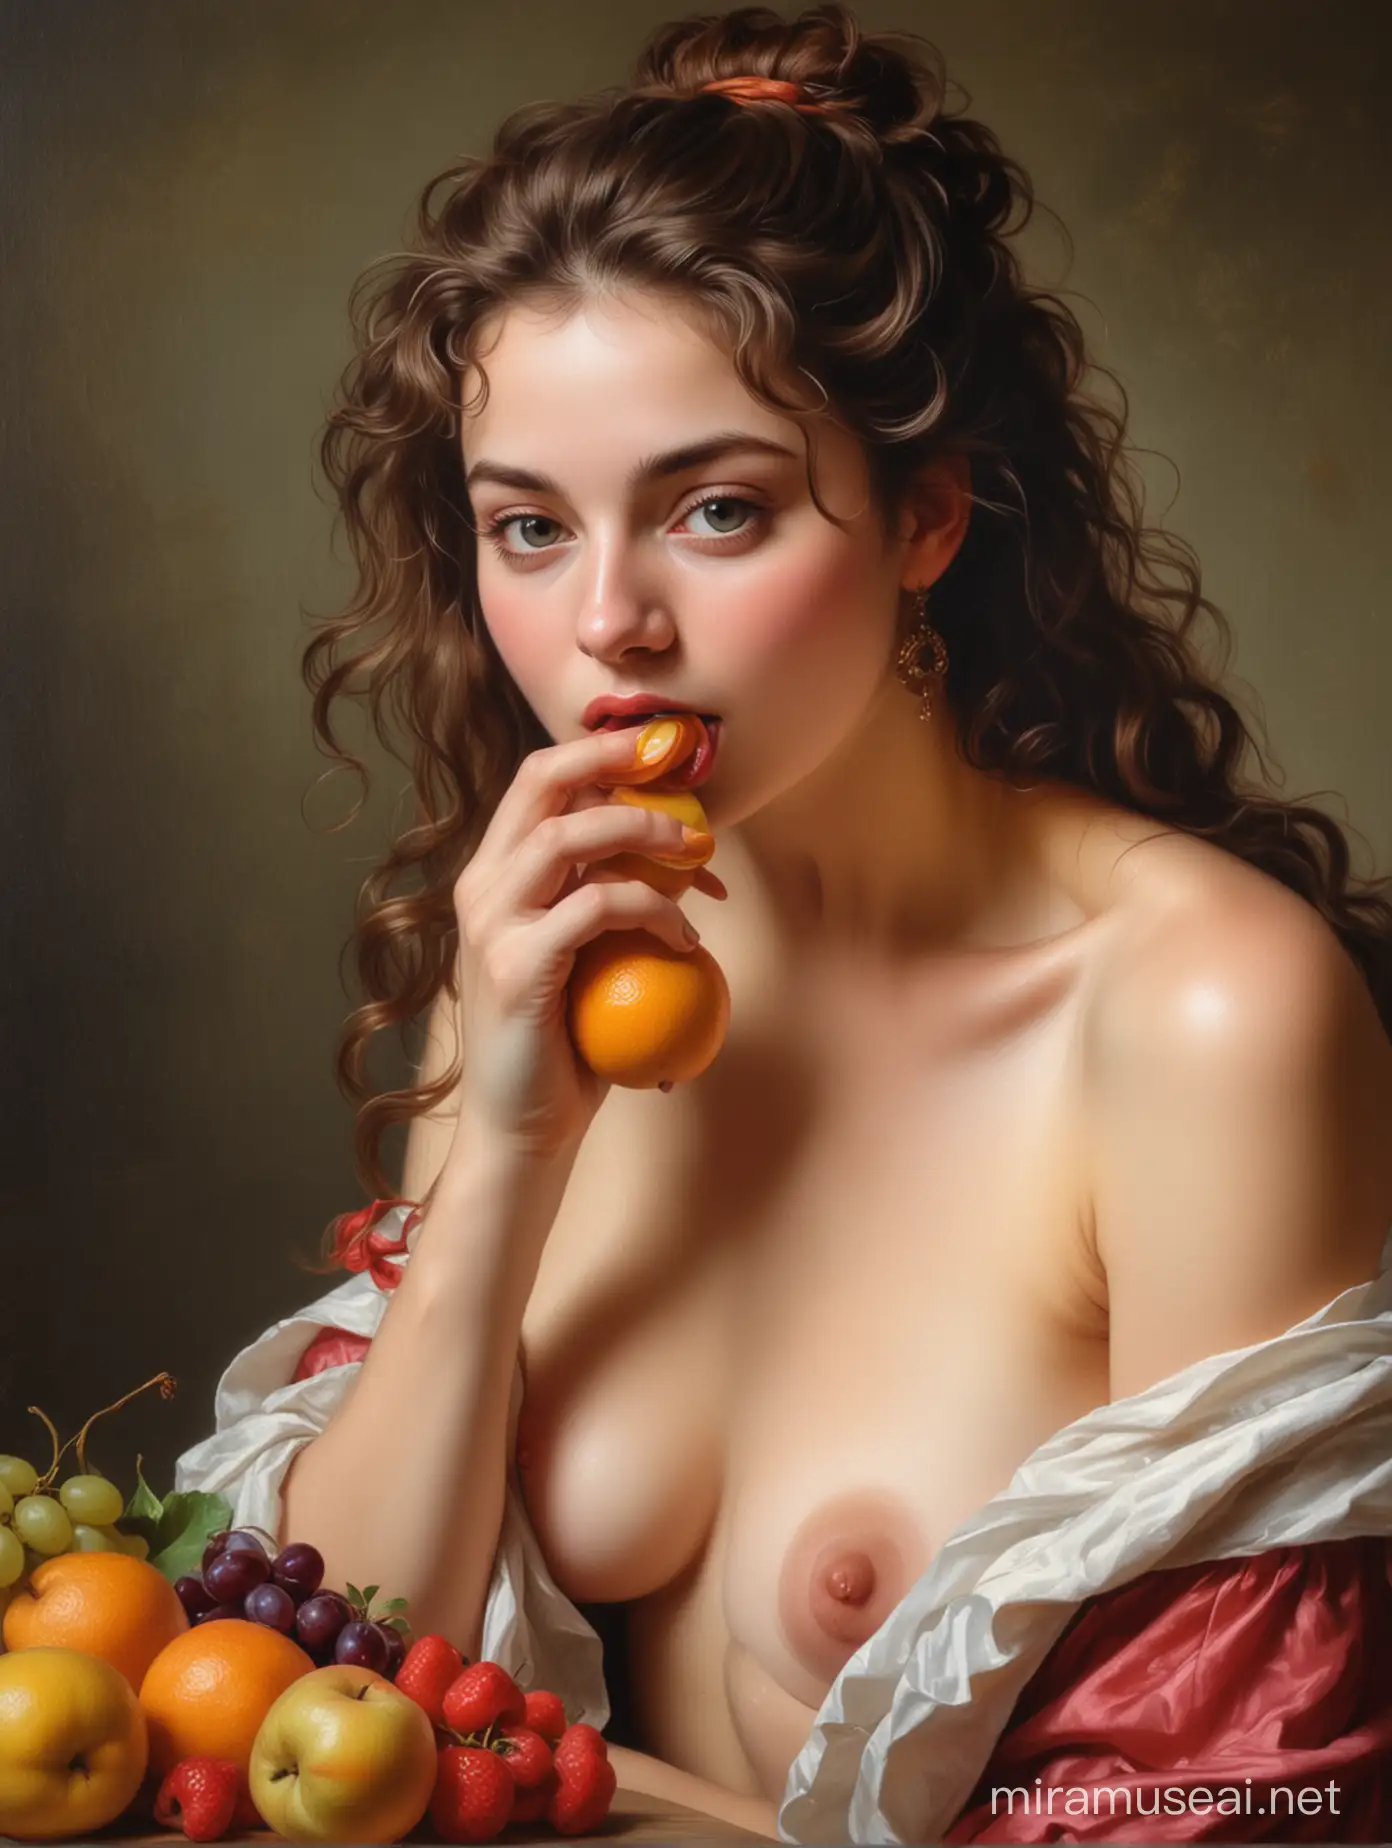 Elegant Nude Portrait Young Woman Enjoying Fruit in Classic Oil Painting Style